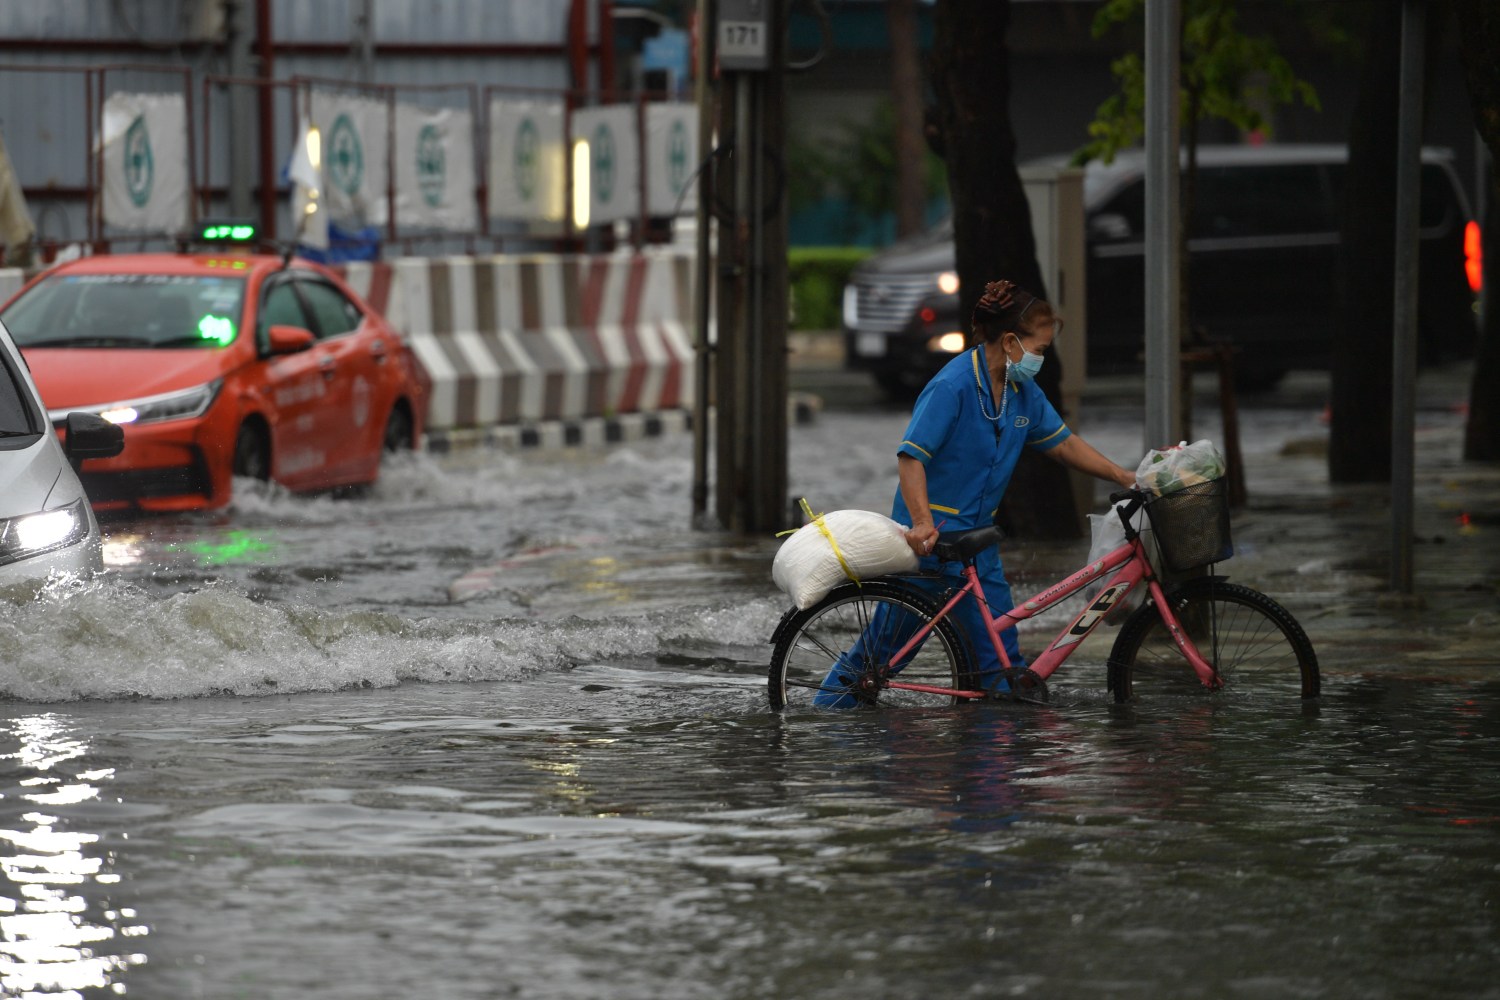 A woman is seen wearing a face mask pushes her bicycle through a water-logged road during a heavy rain in Bangkok on September 19, 2021 in Bangkok, Thailand. (Photo by Vachira Vachira/NurPhoto)NO USE FRANCE